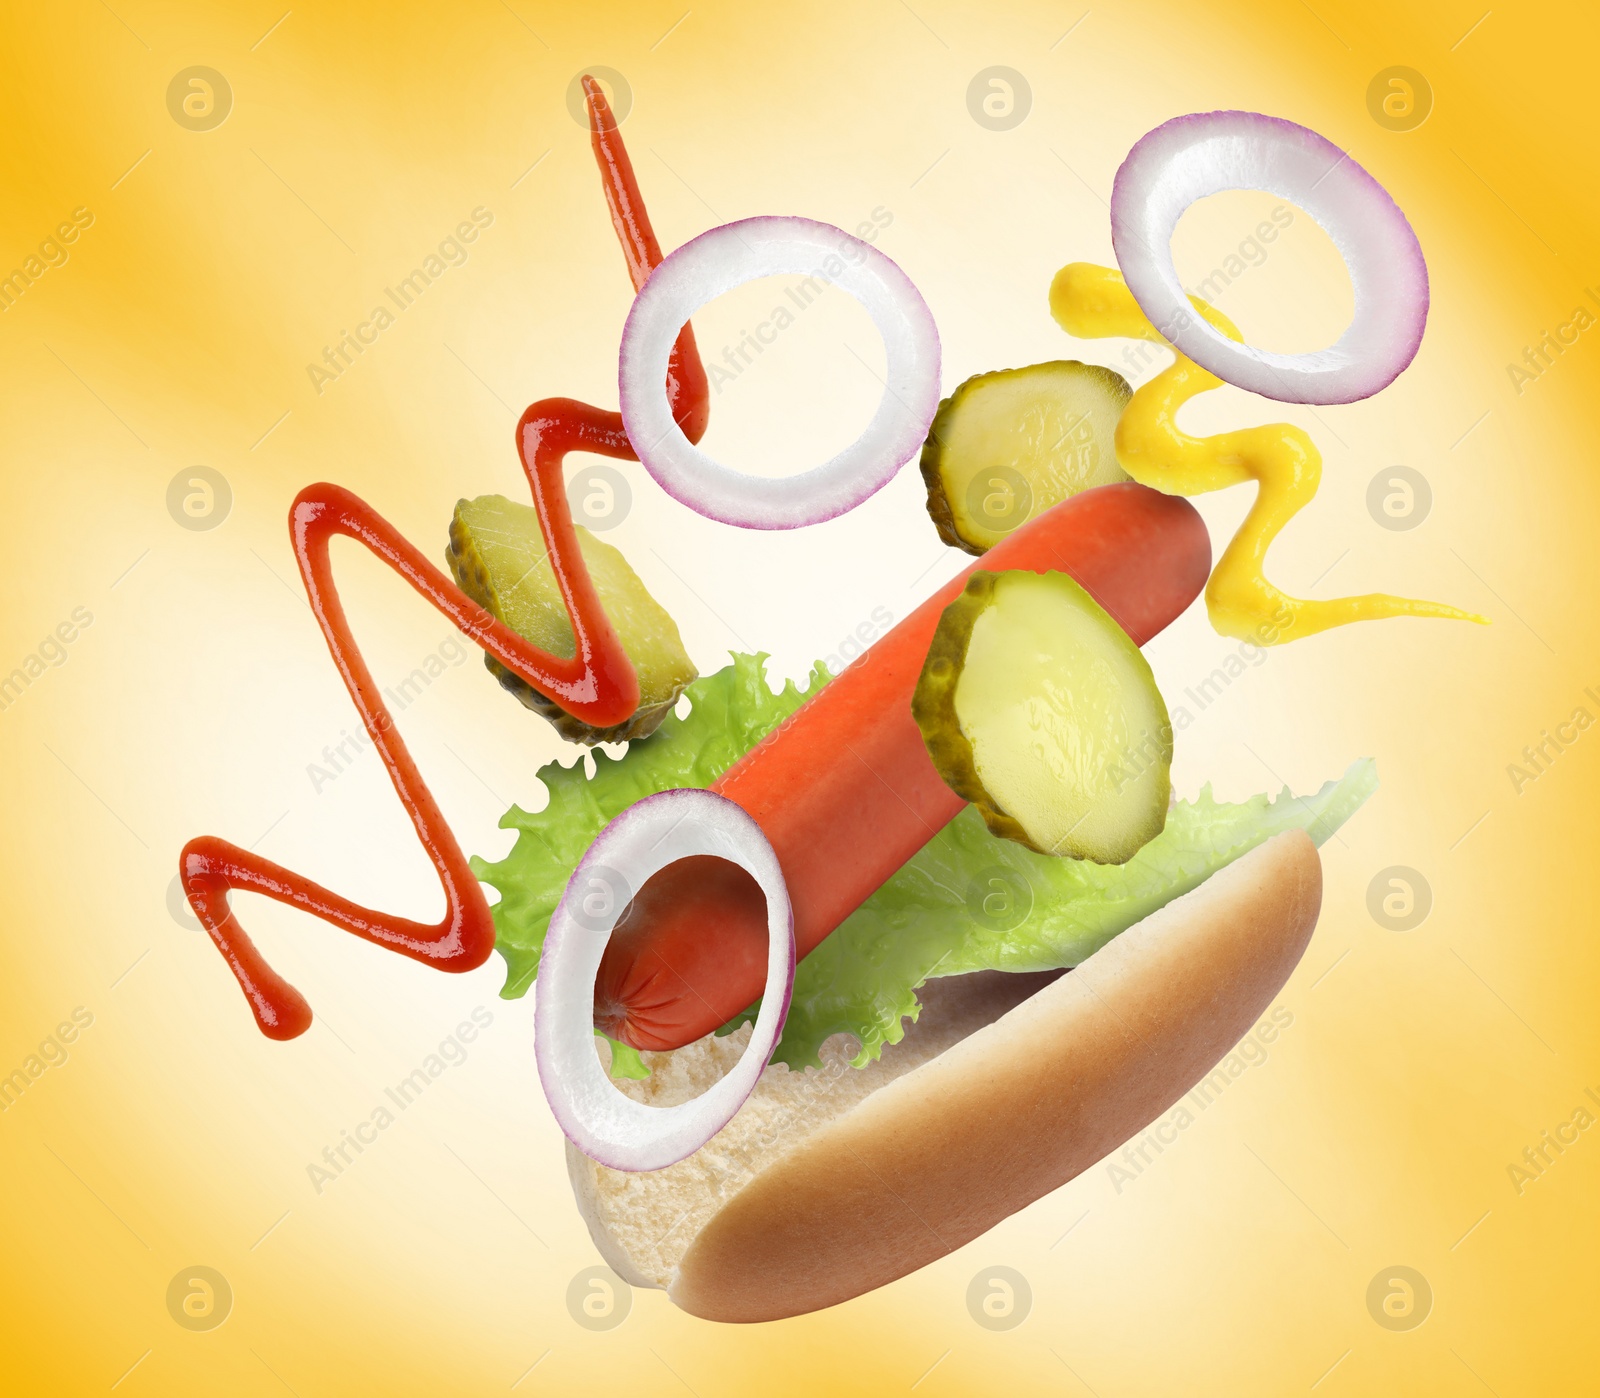 Image of Hot dog ingredients in air on golden gradient background